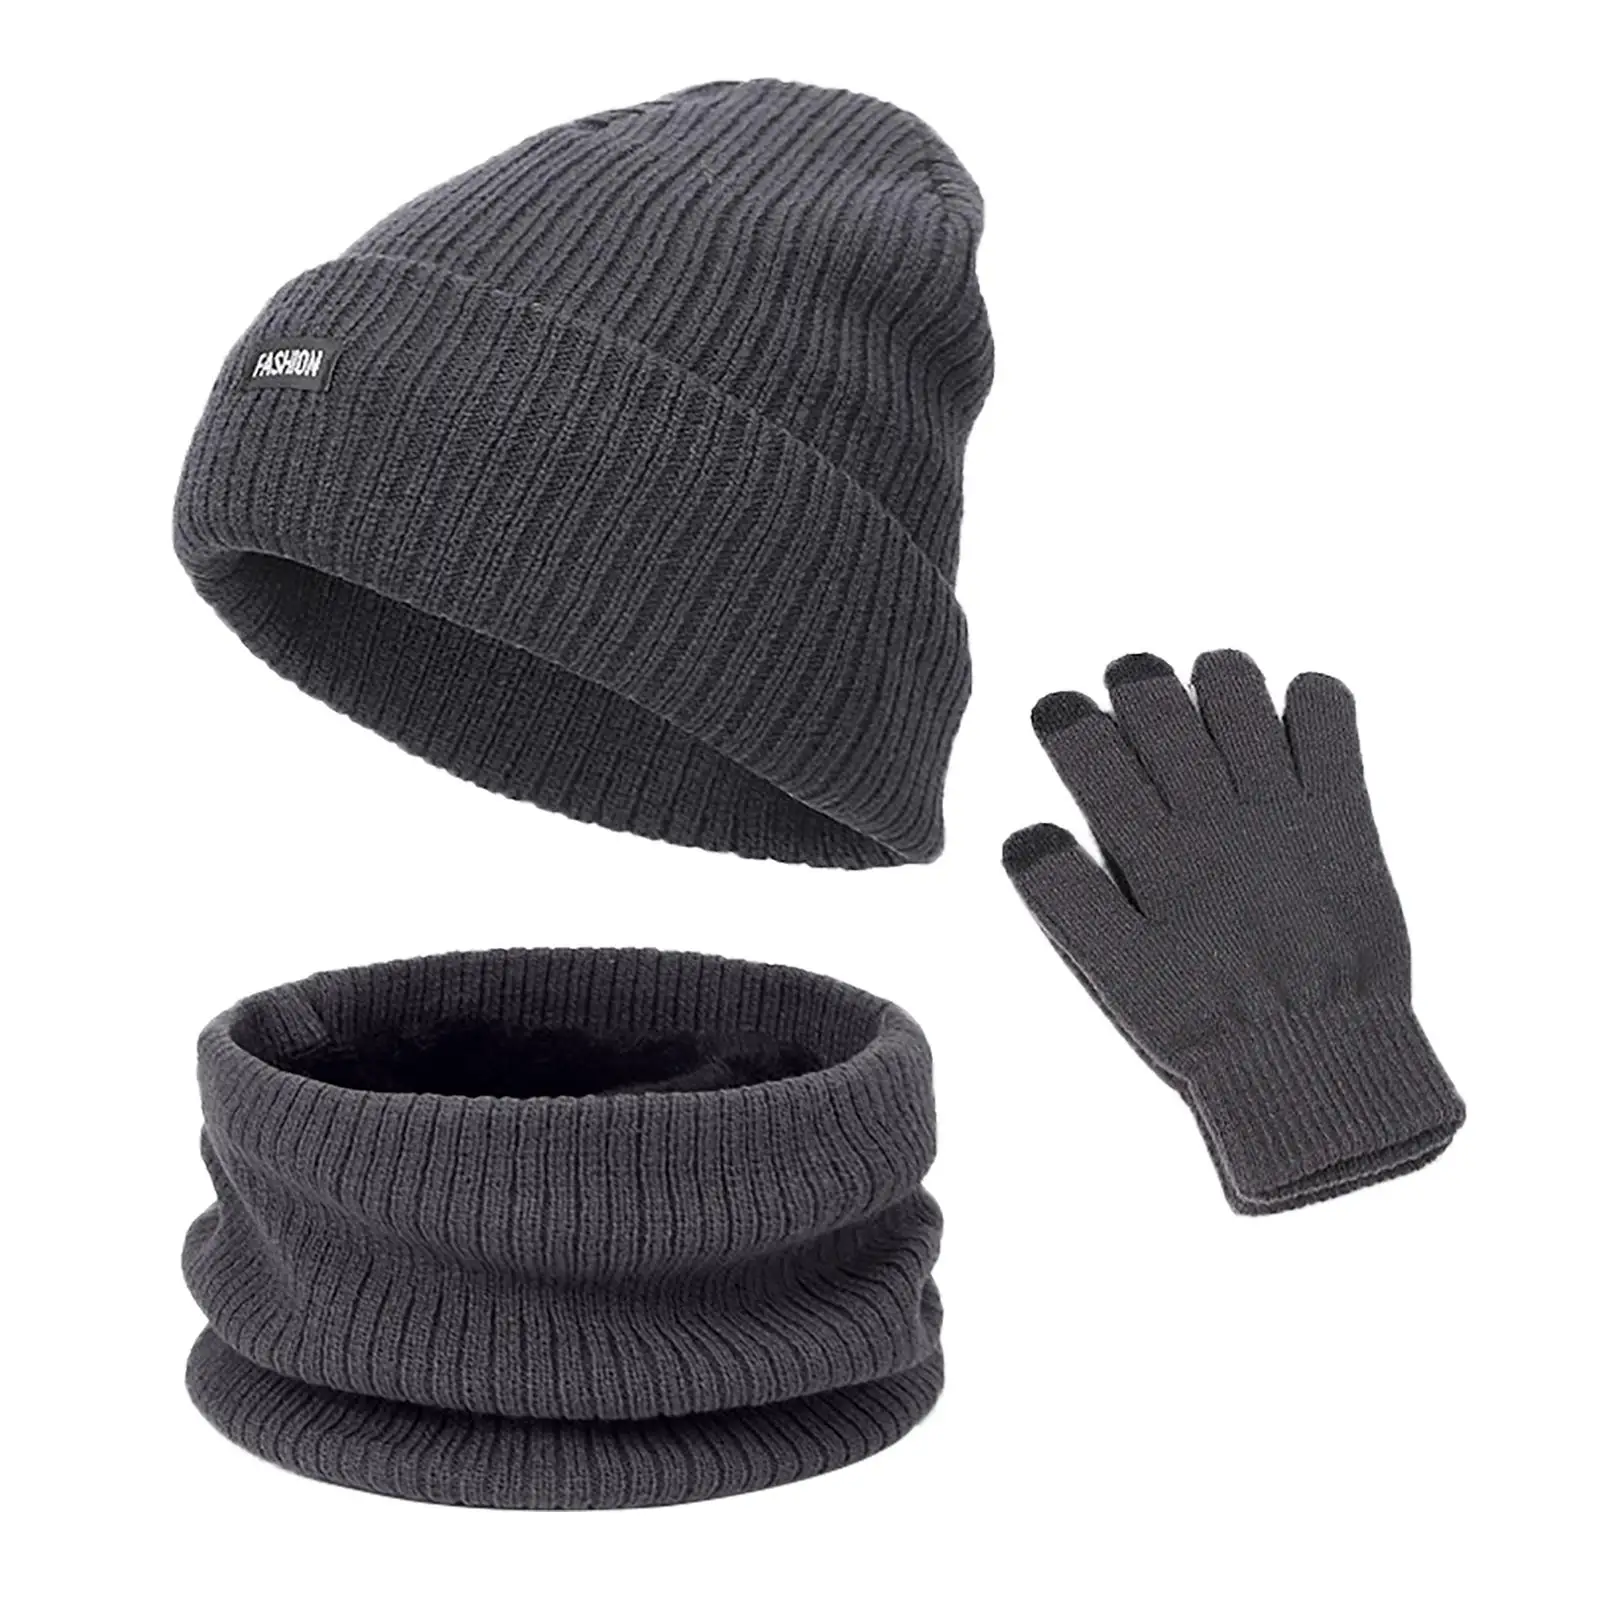 Men Women Beanie Hat Scarf Gloves Set Warm Winter Thermal Soft Thick Cotton for Ski Skating Daily Fishing Cold Weather